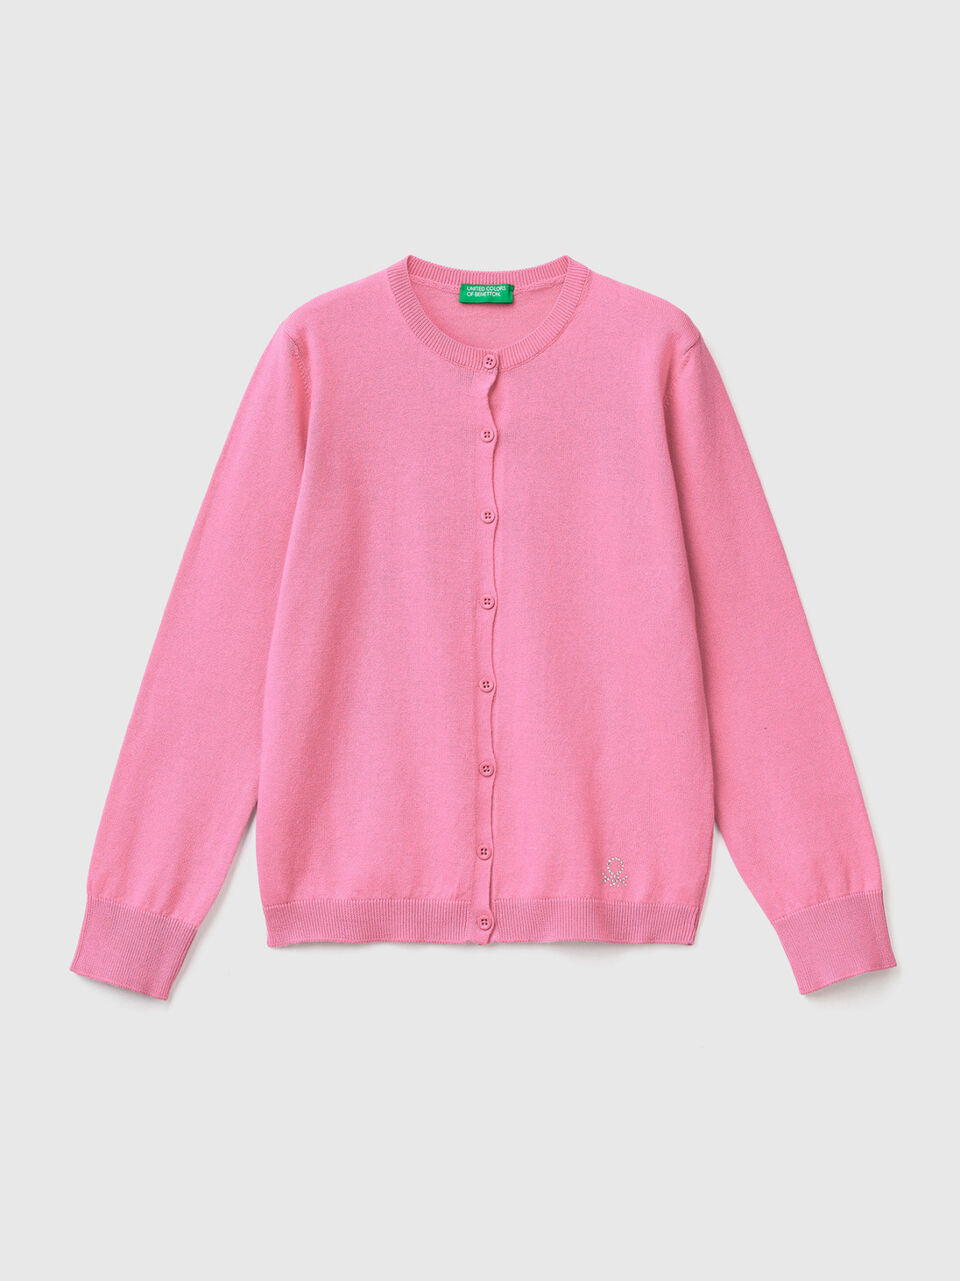 (image for) benetton outlet online shop Cardigan girocollo in misto cotone outlet benetton online